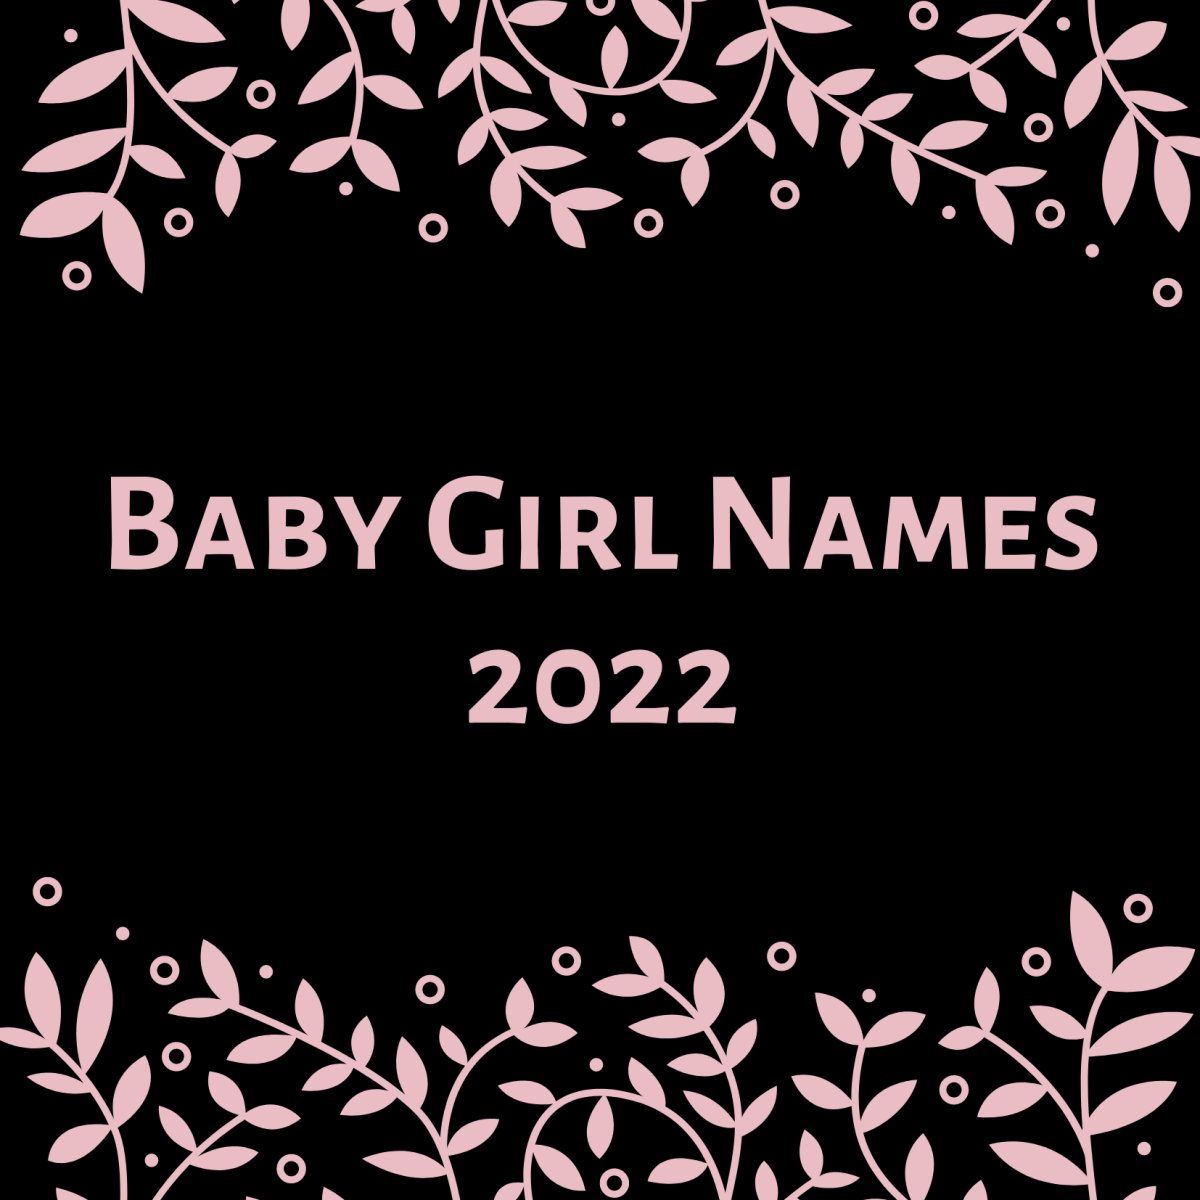 Top Baby Names for Girls in 2022